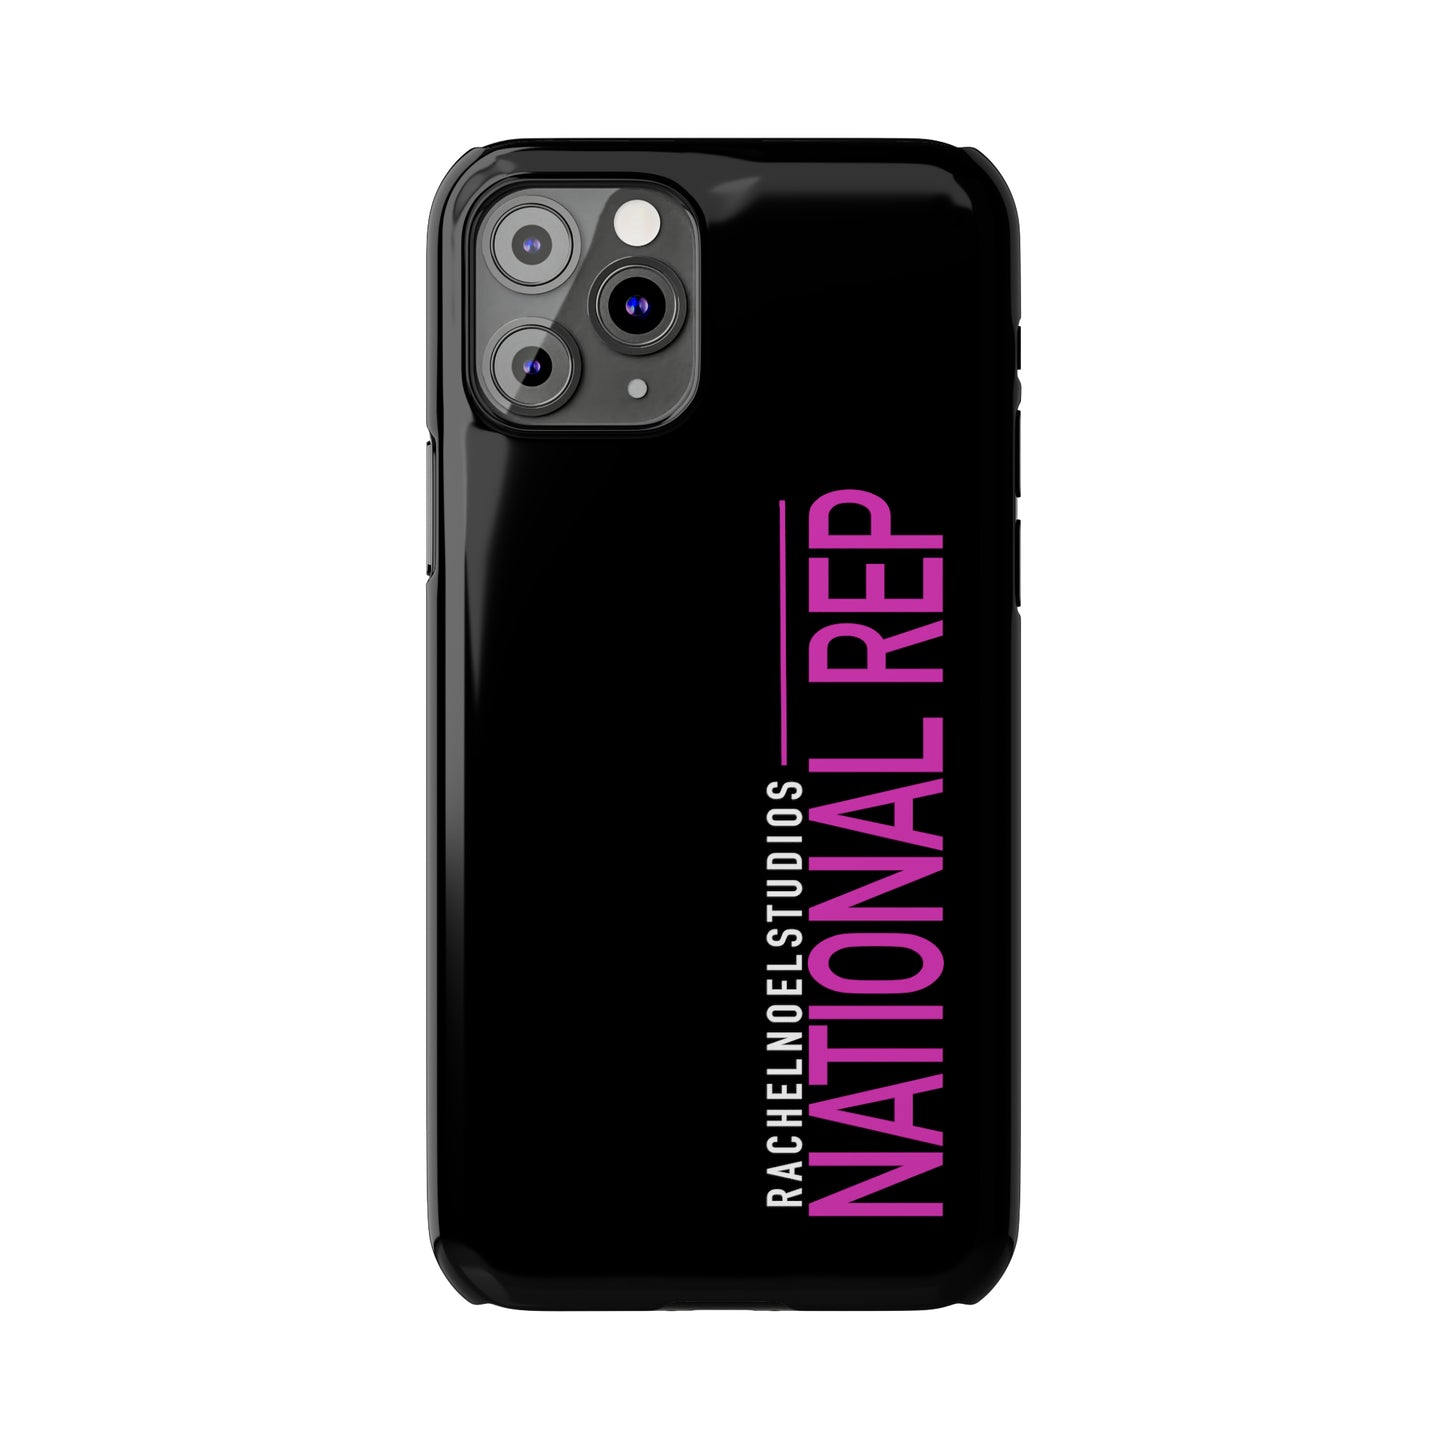 “National Rep” RNS Phone Cases